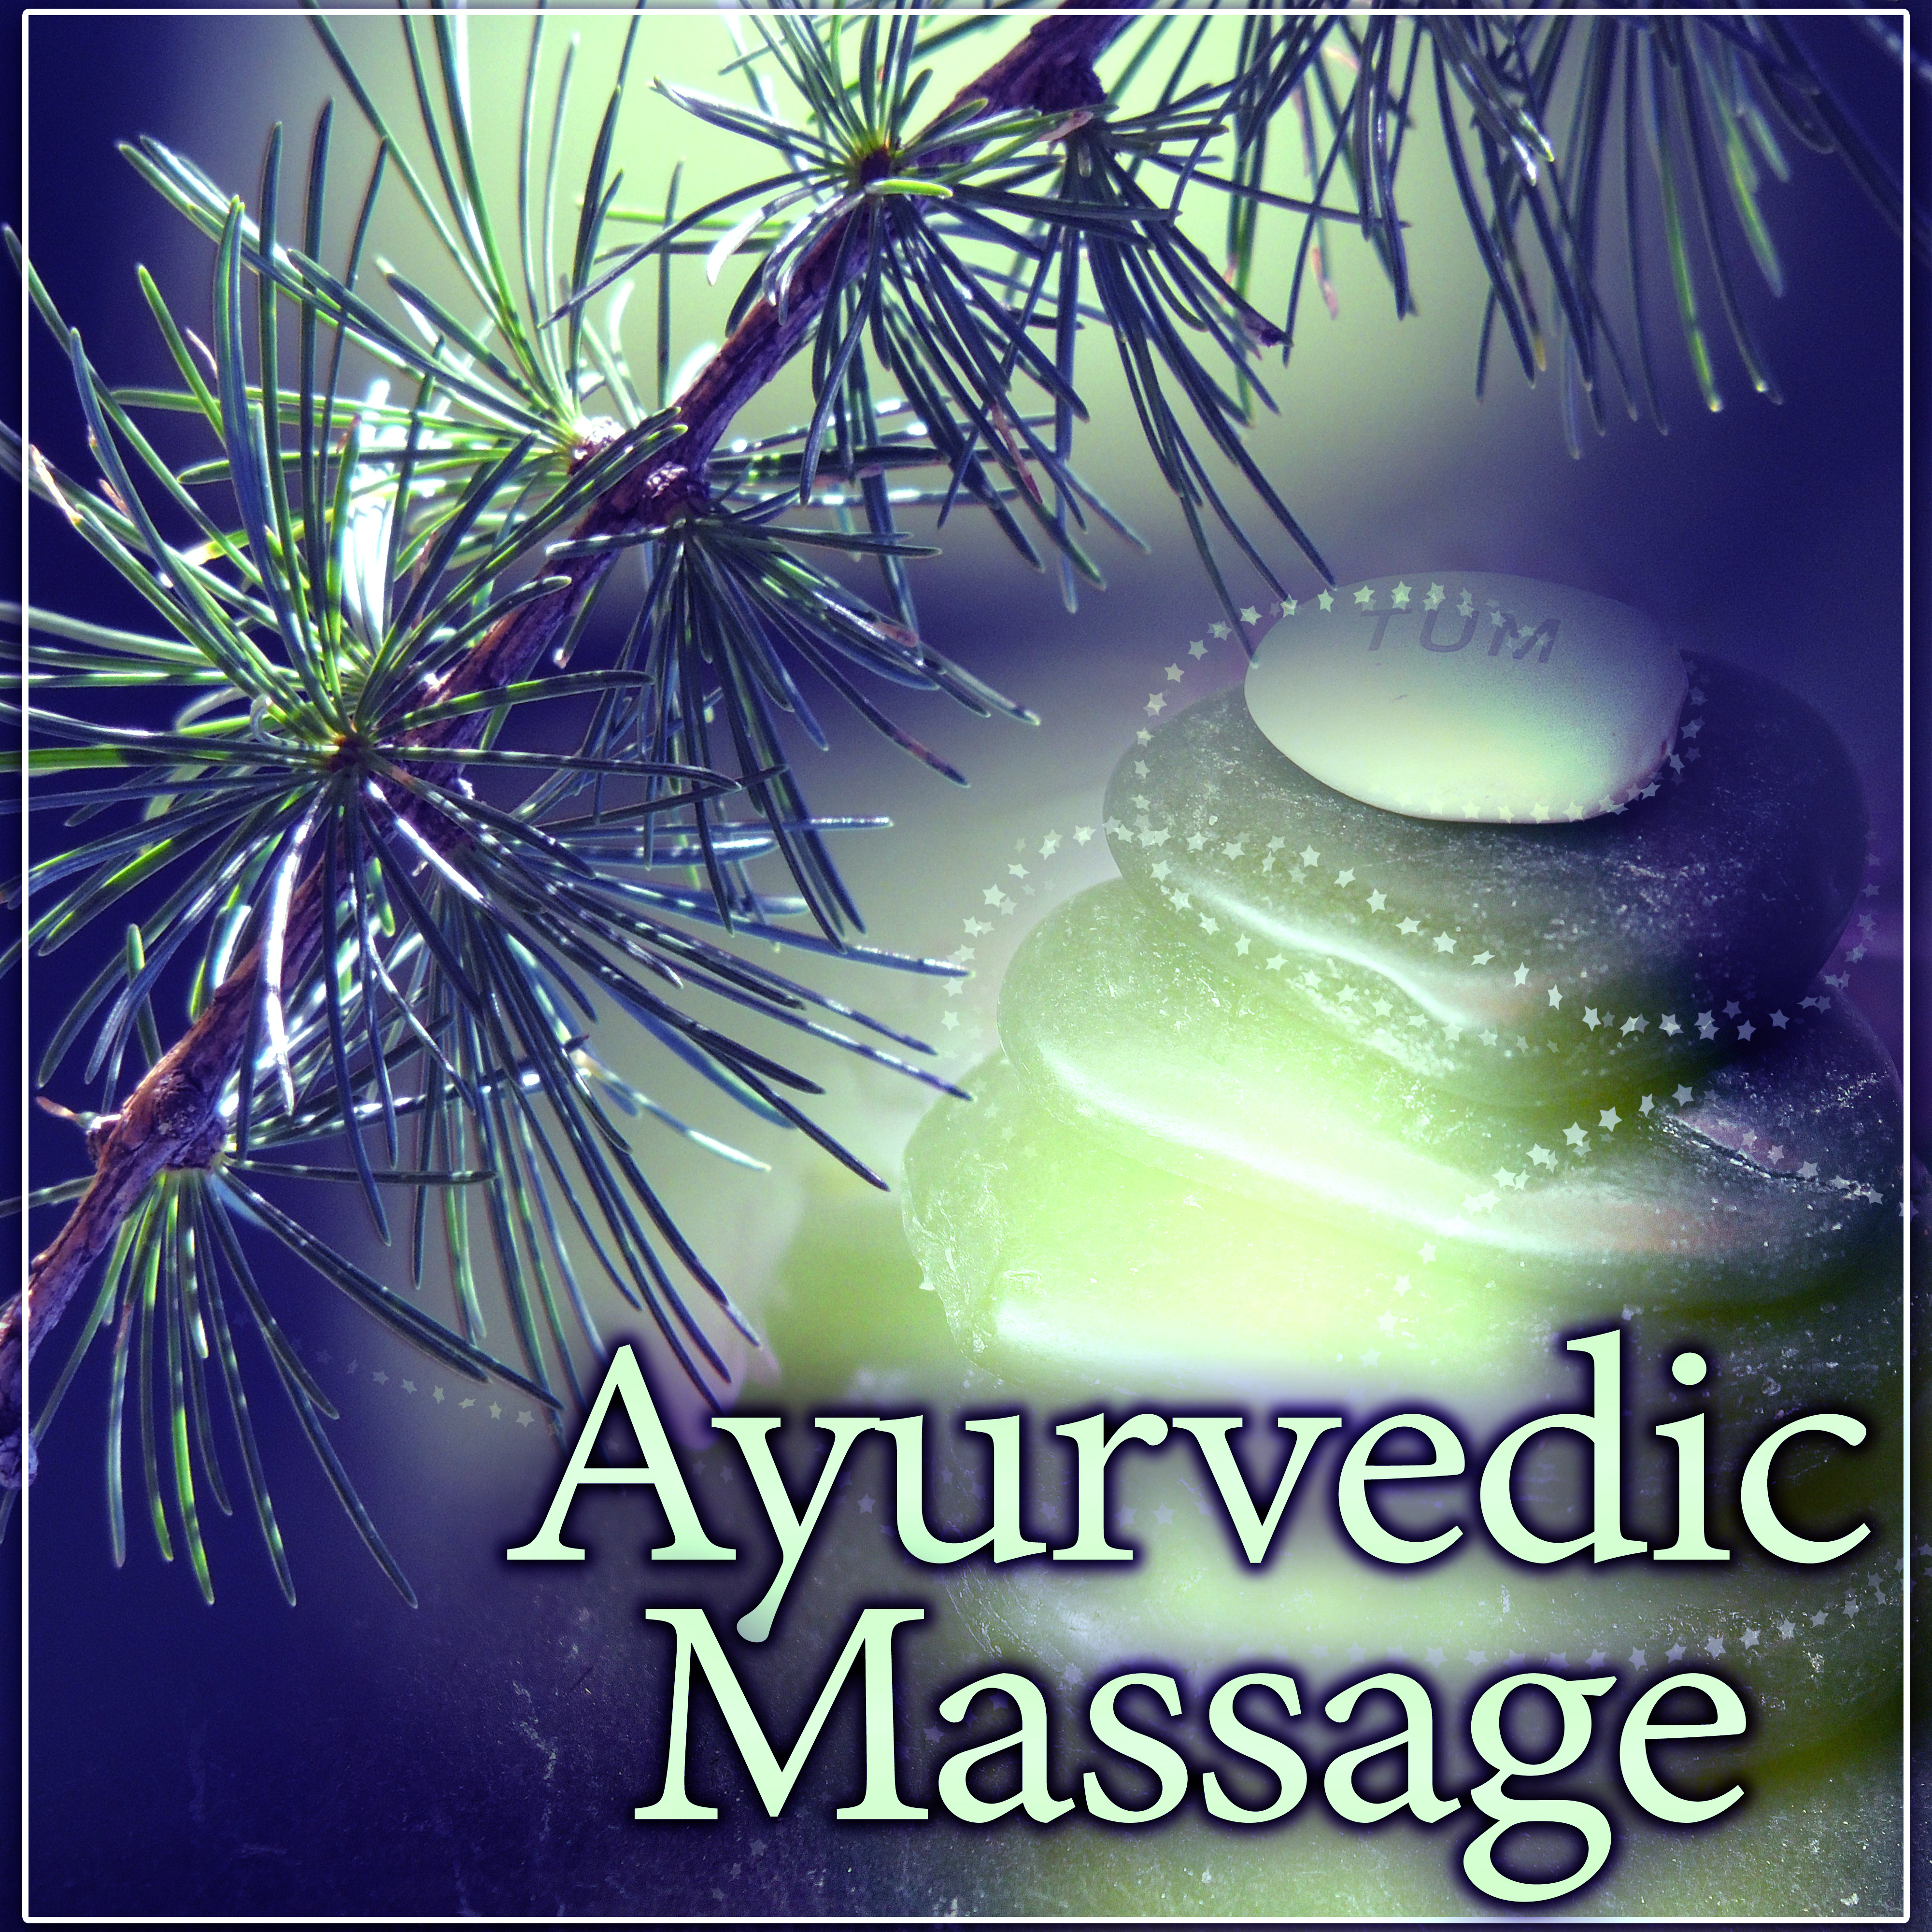 Ayurvedic Massage – Mystic Music for Meditation While Wellness, Calm New Age Music for Deep Relaxation After Classic Massage, Hot Stone Massage, Zen Music